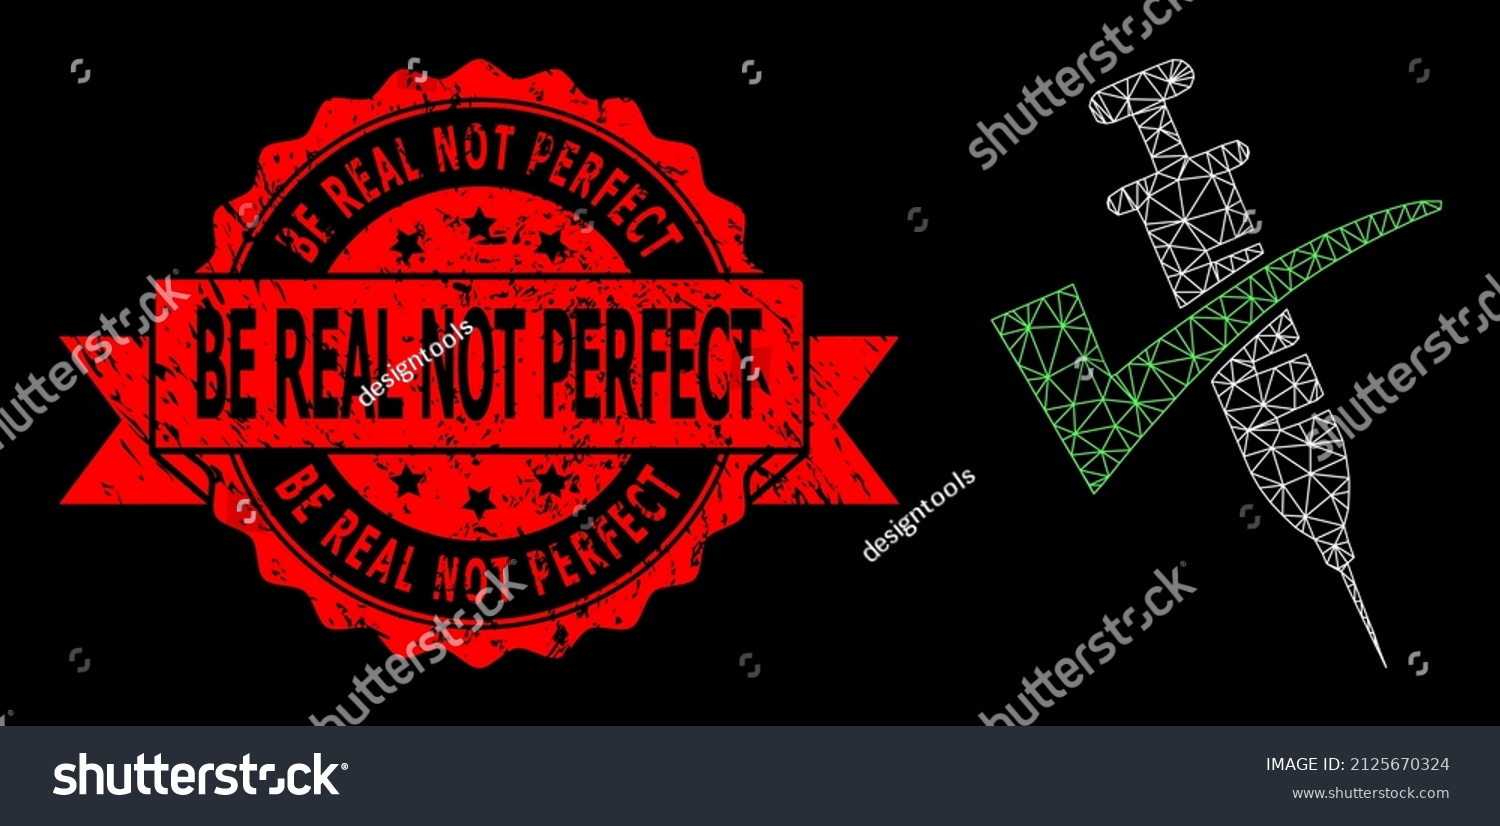 SVG of Vector net mesh vaccine confirmed picture with Be Real Not Perfect unclean seal on a black background. Red seal has Be Real Not Perfect title inside ribbon. svg